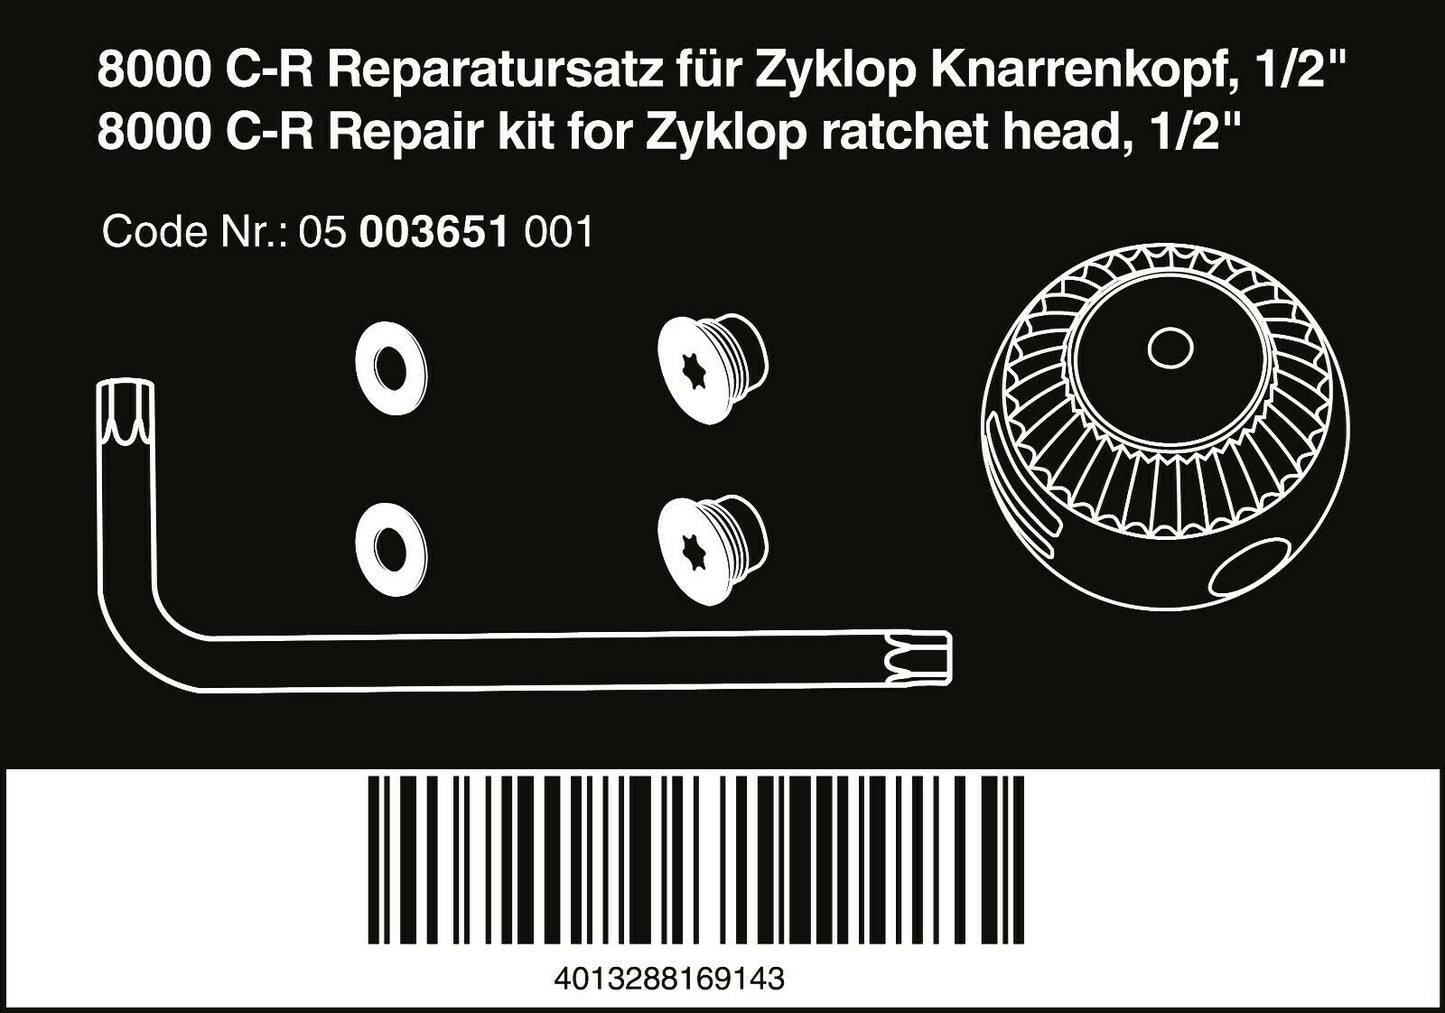 wera 8000 c-r zyklop socket wrench repair kit 1/2" 05003651001